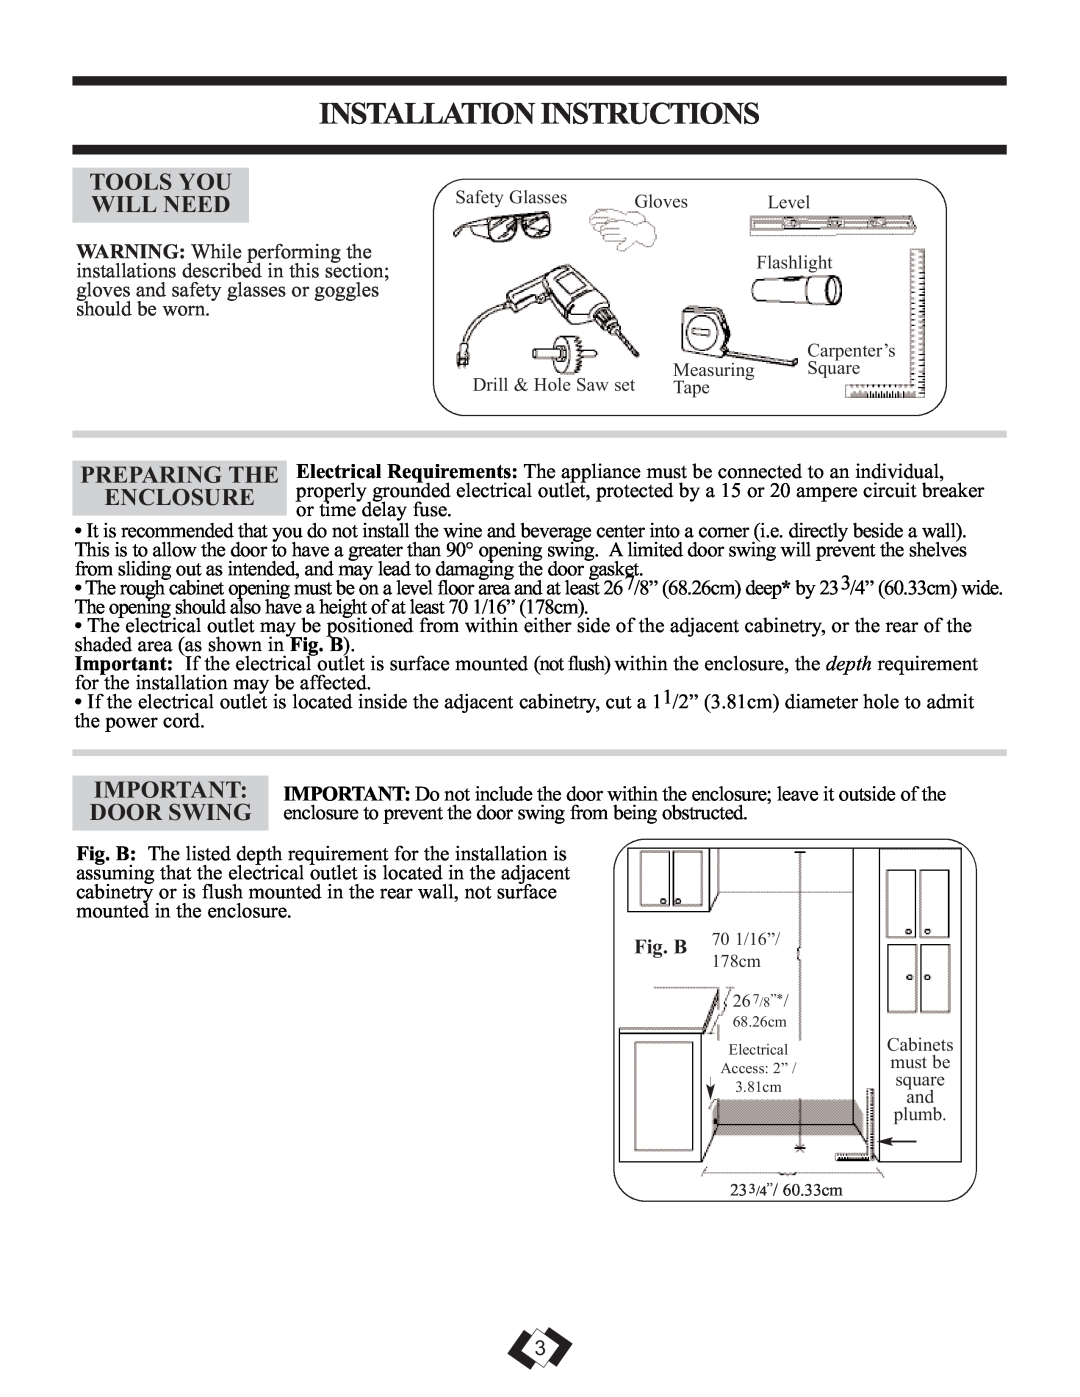 Danby DWBC14BLS Installation Instructions, Tools You Will Need, Preparing The, Enclosure, Door Swing, Fig. B 